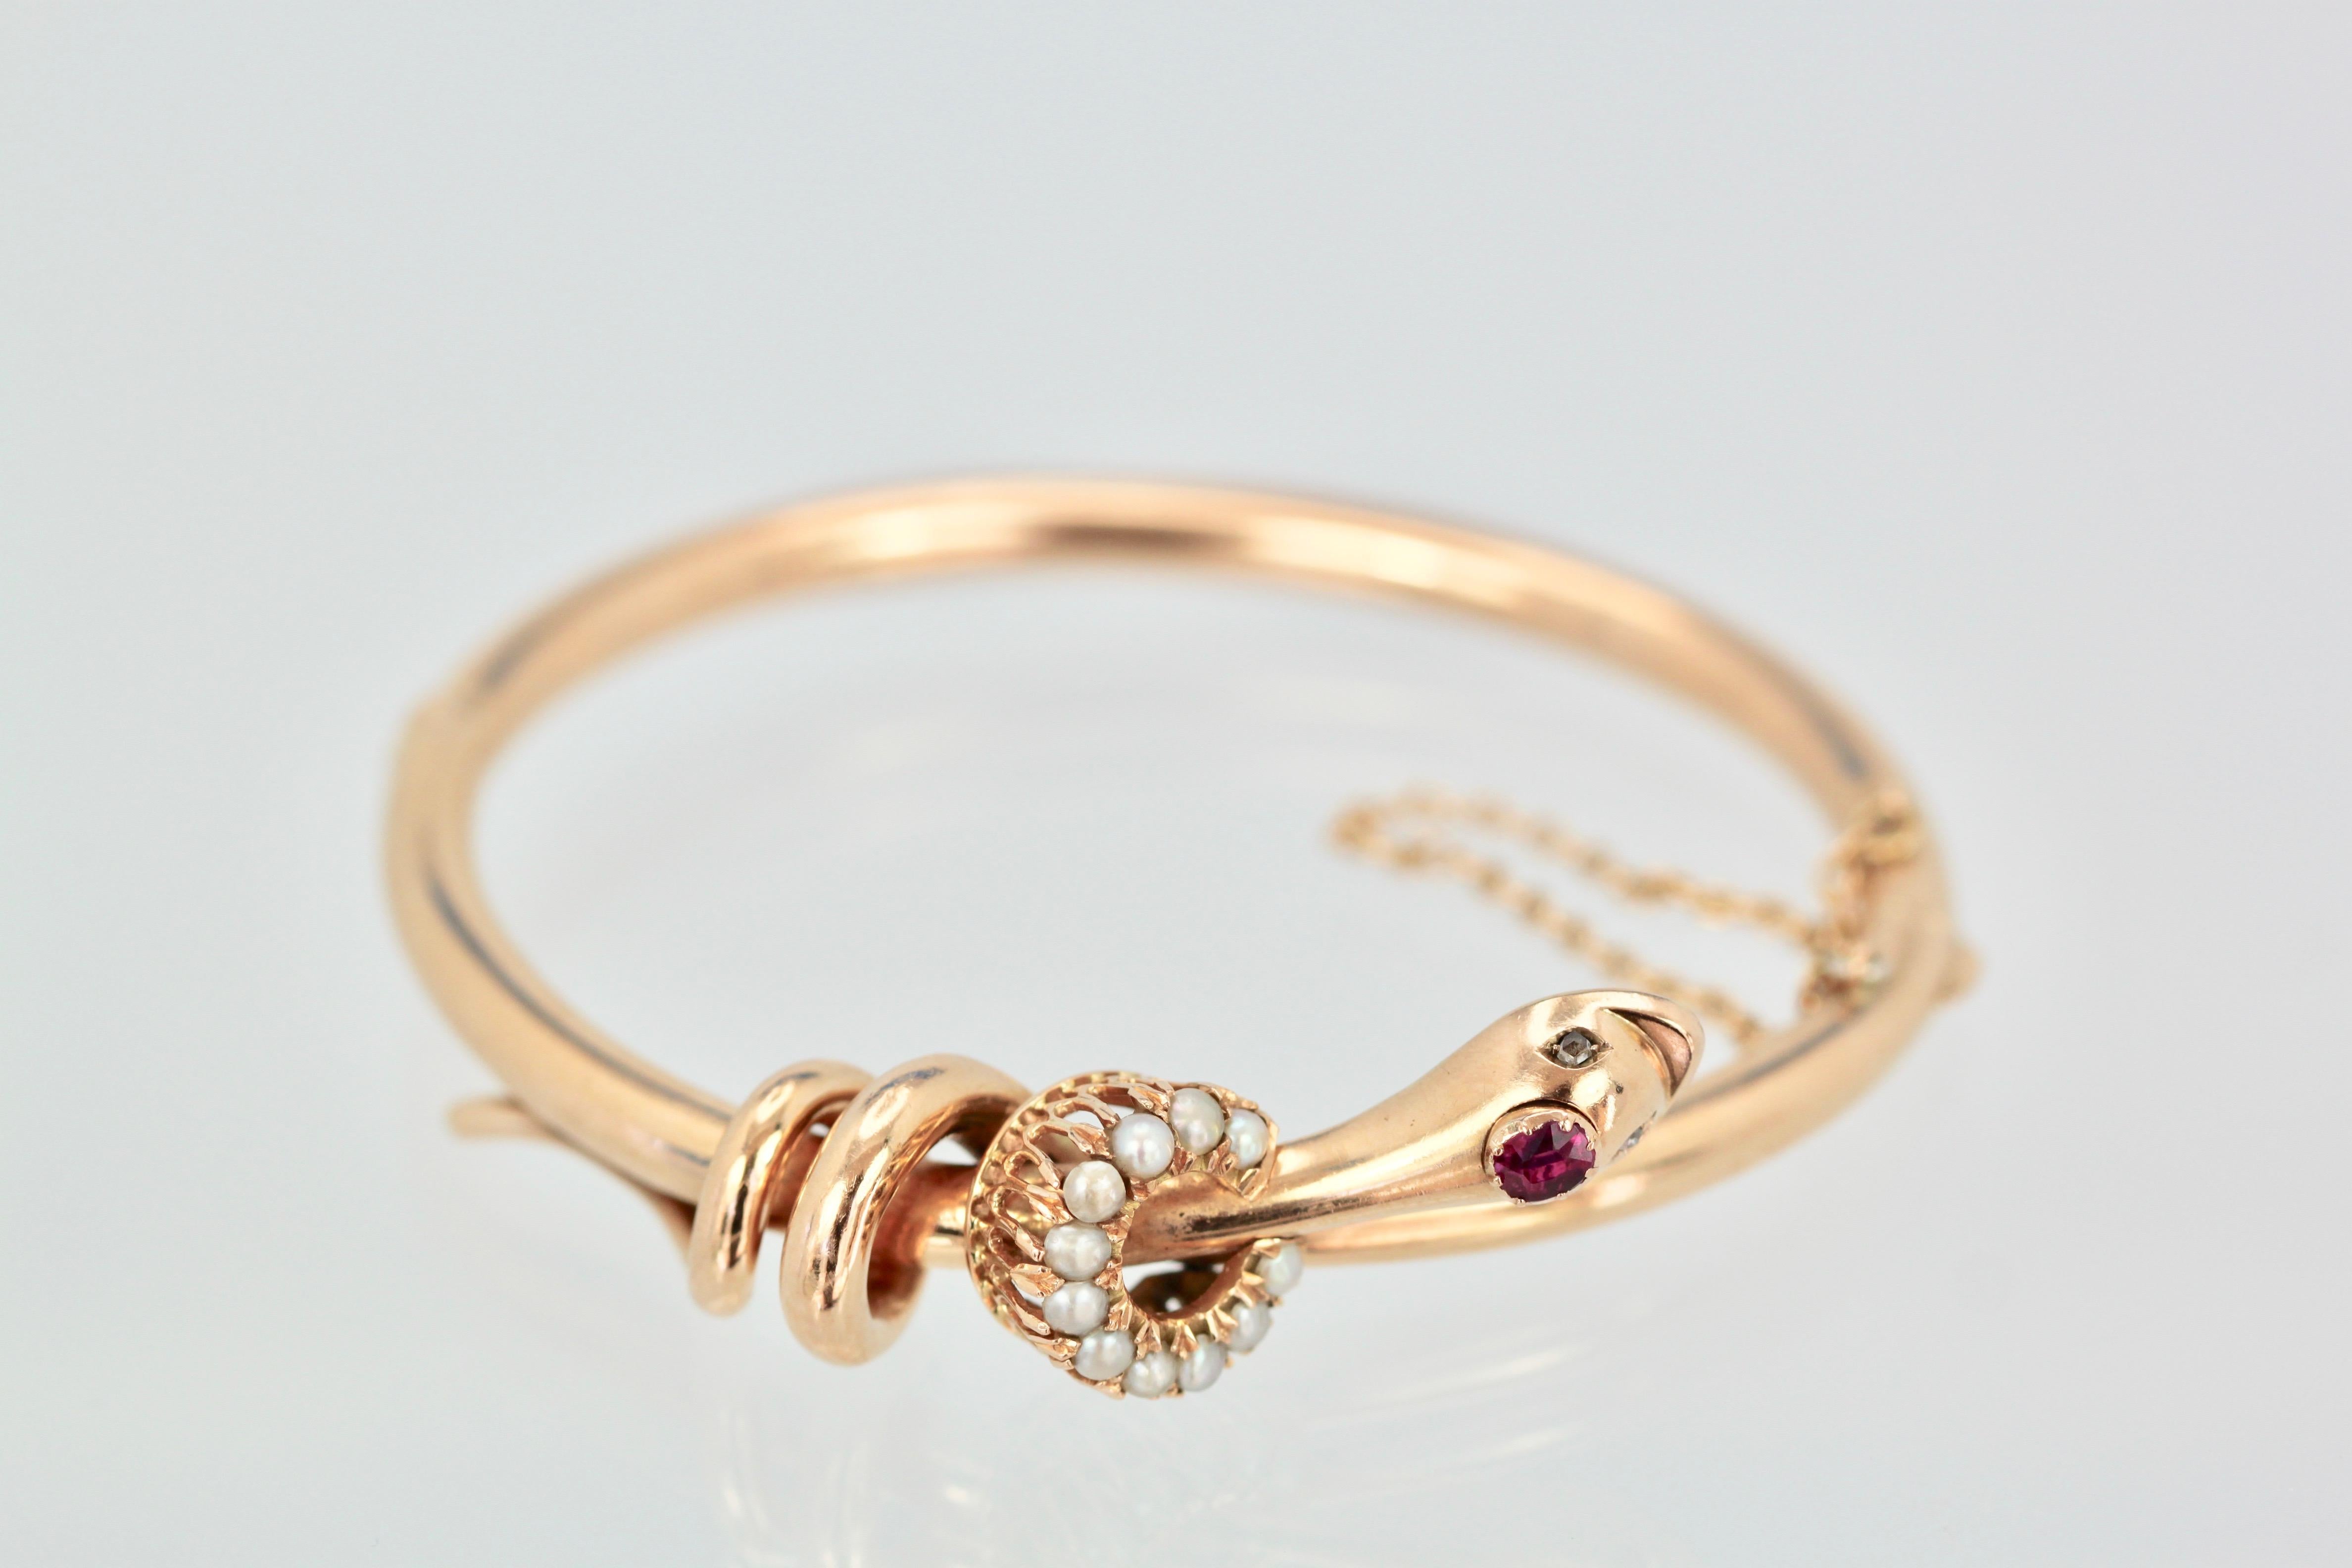 This Snake Serpent Bracelet with Ruby Head Pearl Collar in 18K yellow gold comes out of France and is unique. As many of you know I collect every lovely snake bracelet I can find and this one is unique. This snake has a Ruby for the head and a